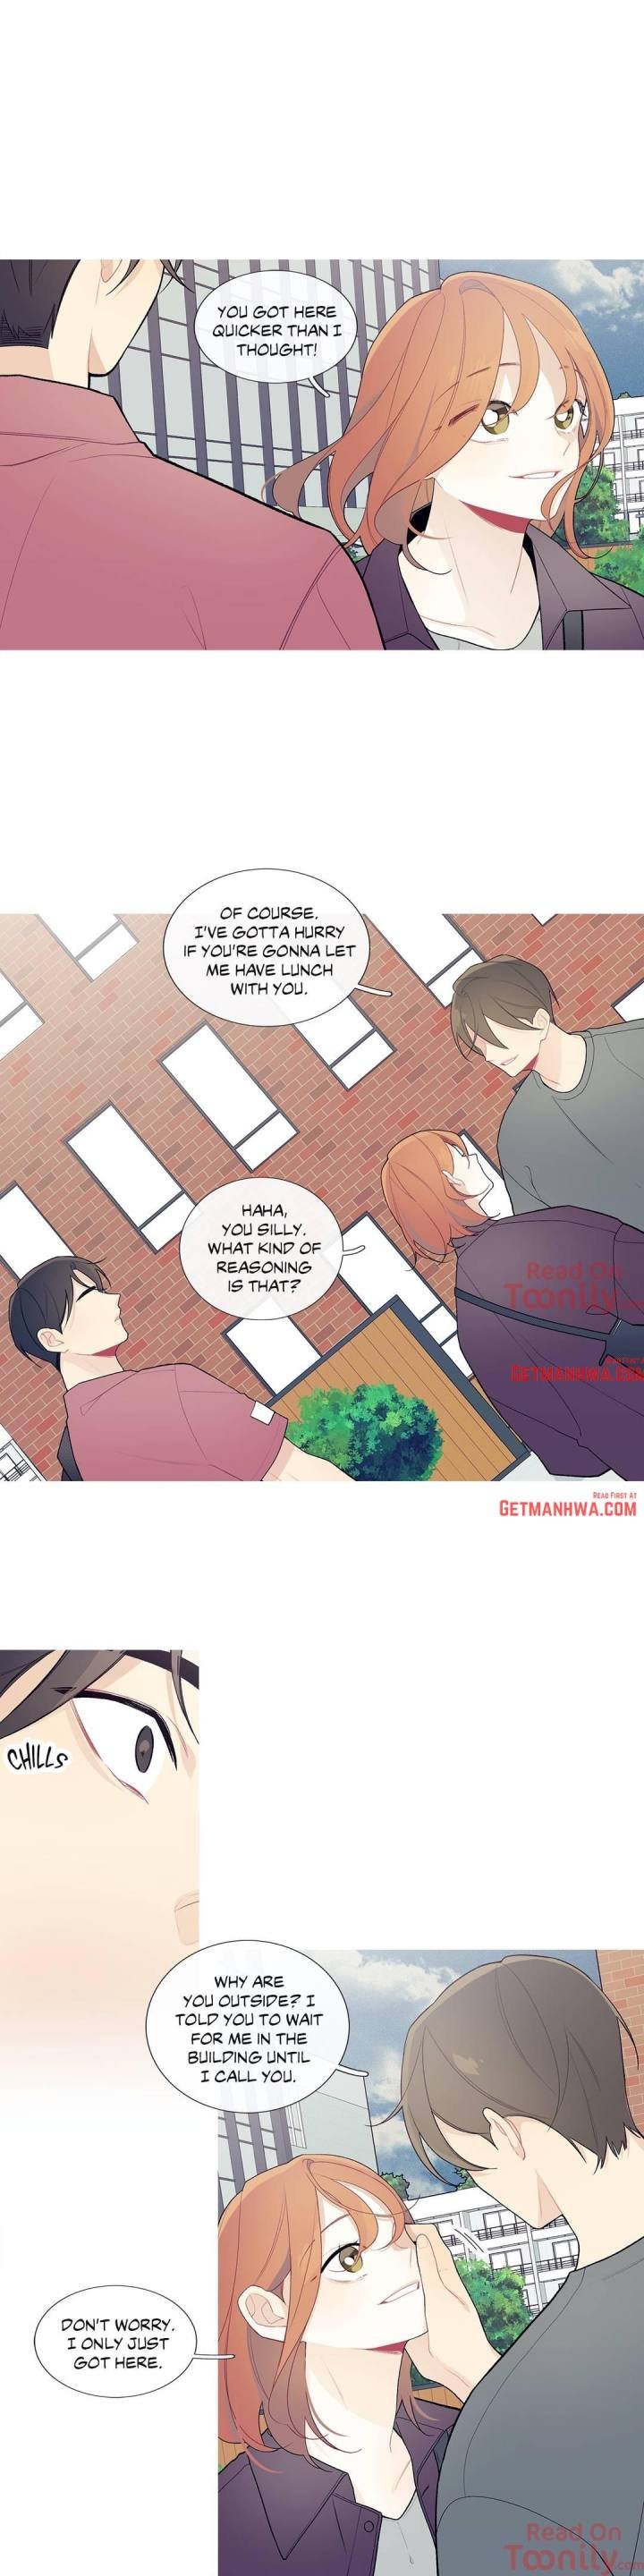 whats-going-on-chap-33-10